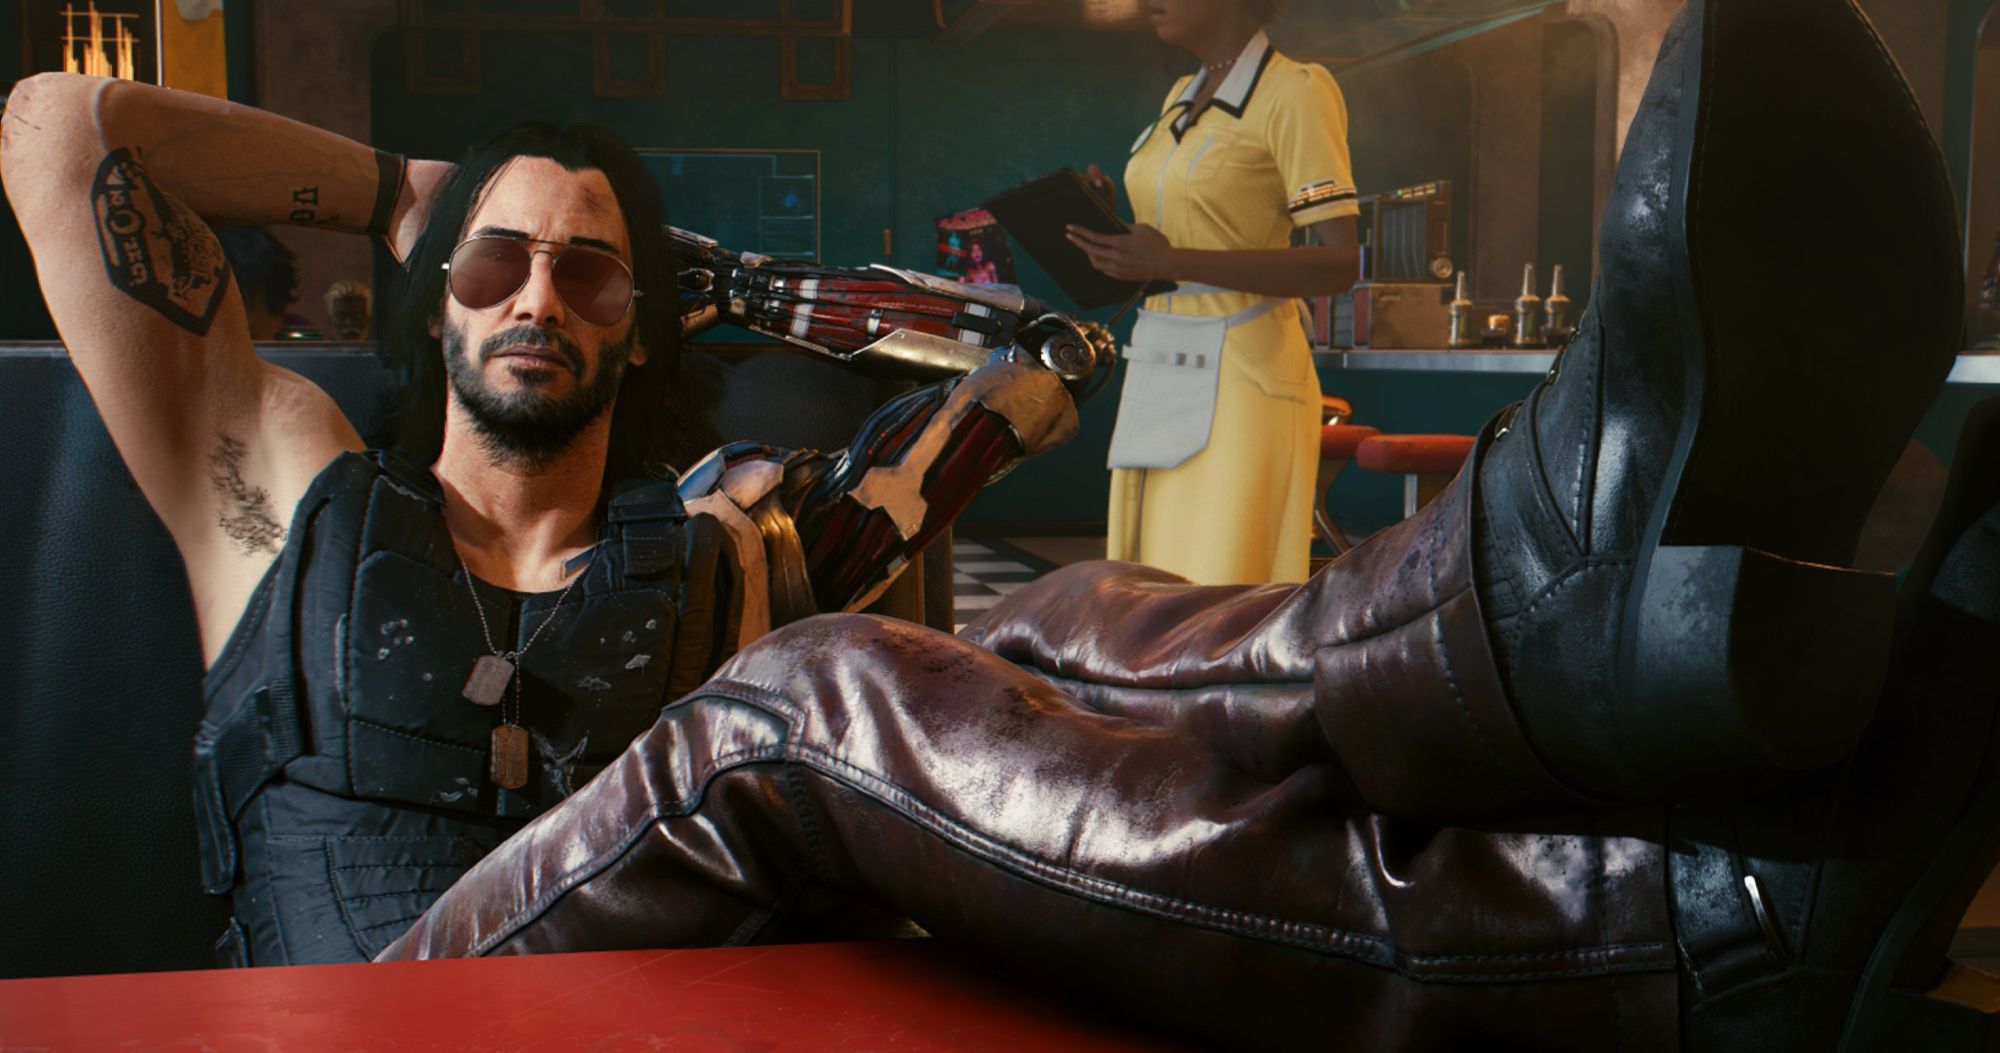 Cyberpunk 2077 Nude Character Glitch Gives Players a Truly NSFW Experience